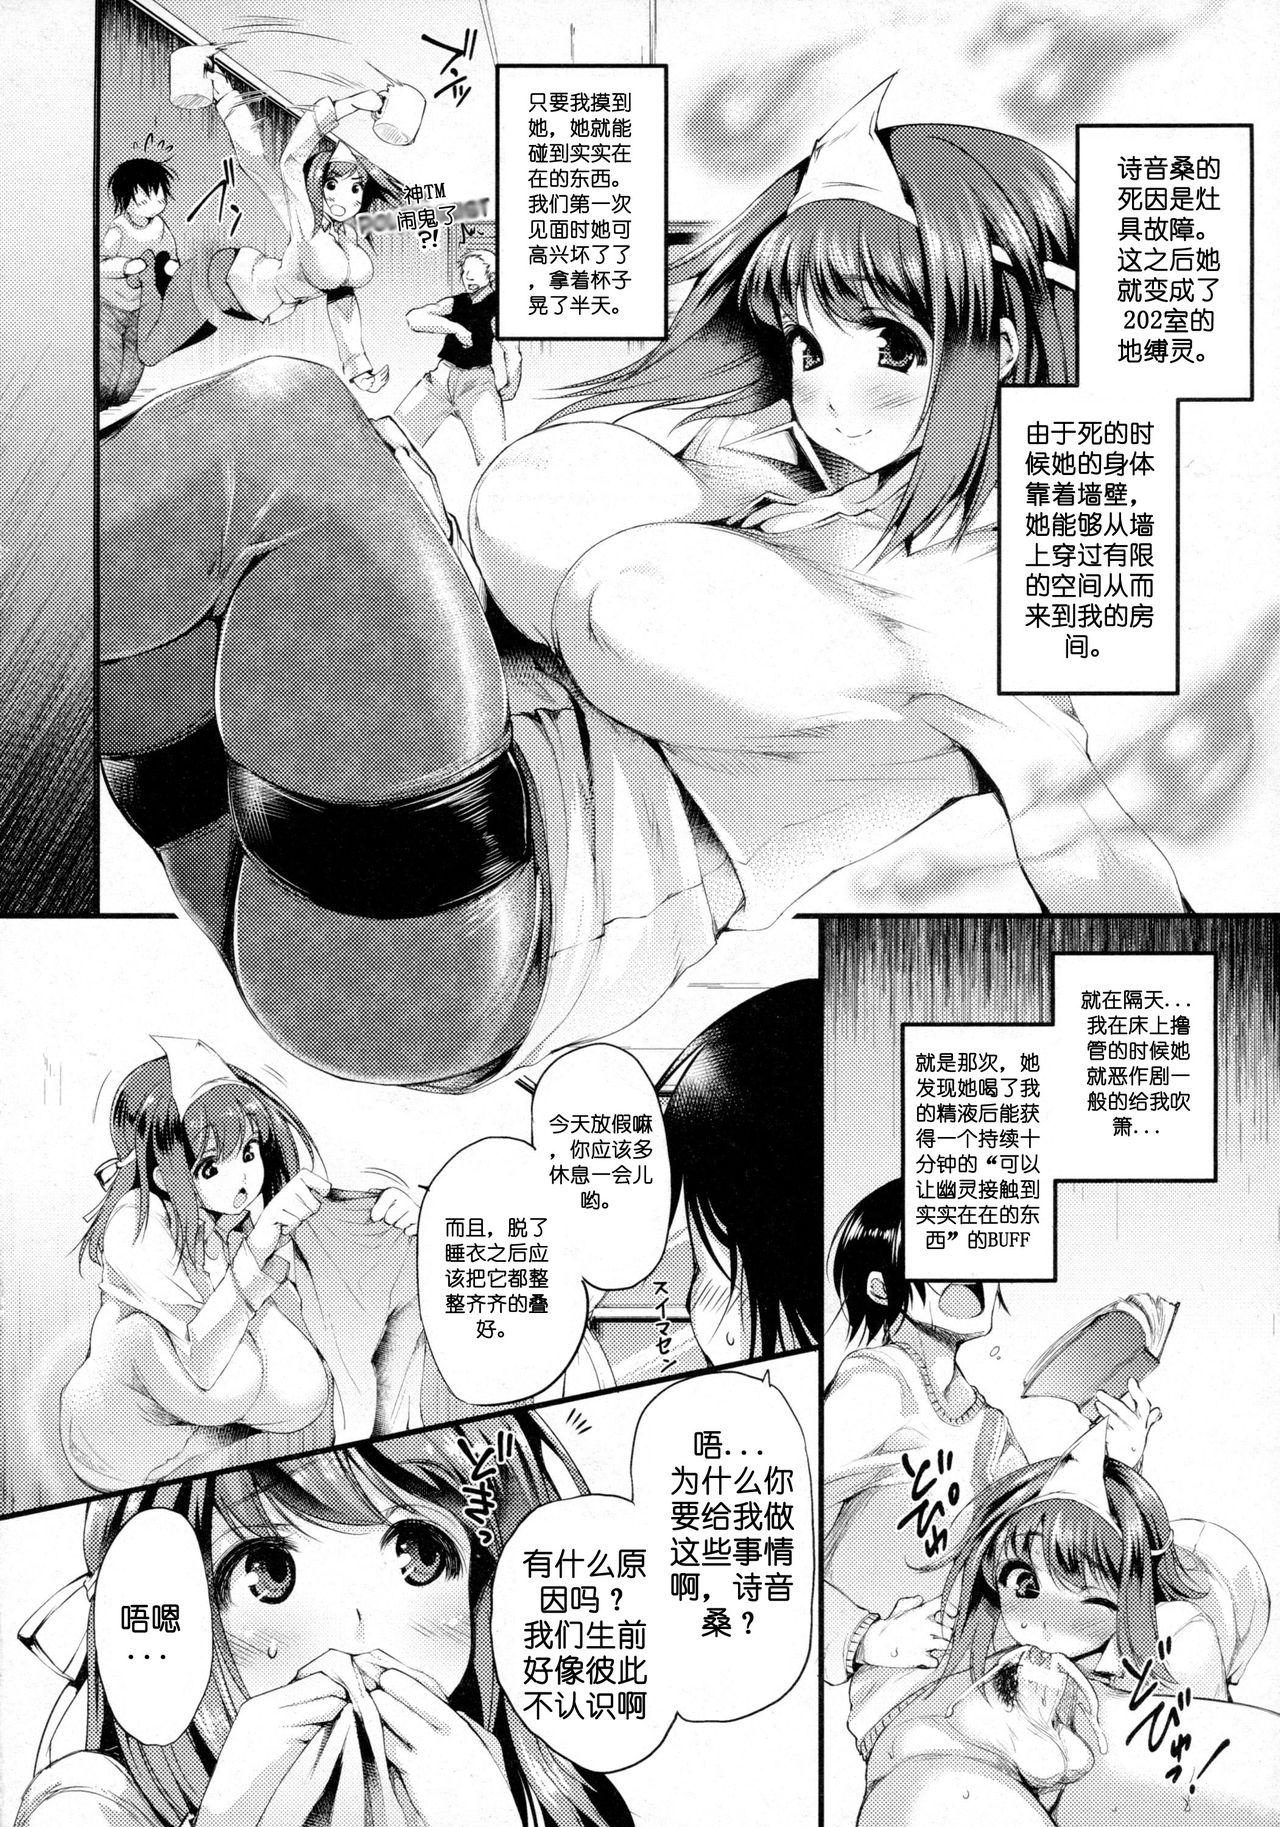 Peituda [Oohira Sunset] 202-Goushitsu no Yuurei-san | The Ghost in Room 202 (COMIC Unreal 2016-02 Vol. 59) [Chinese] [简称天子个人汉化] (Ongoing) Titties - Picture 2